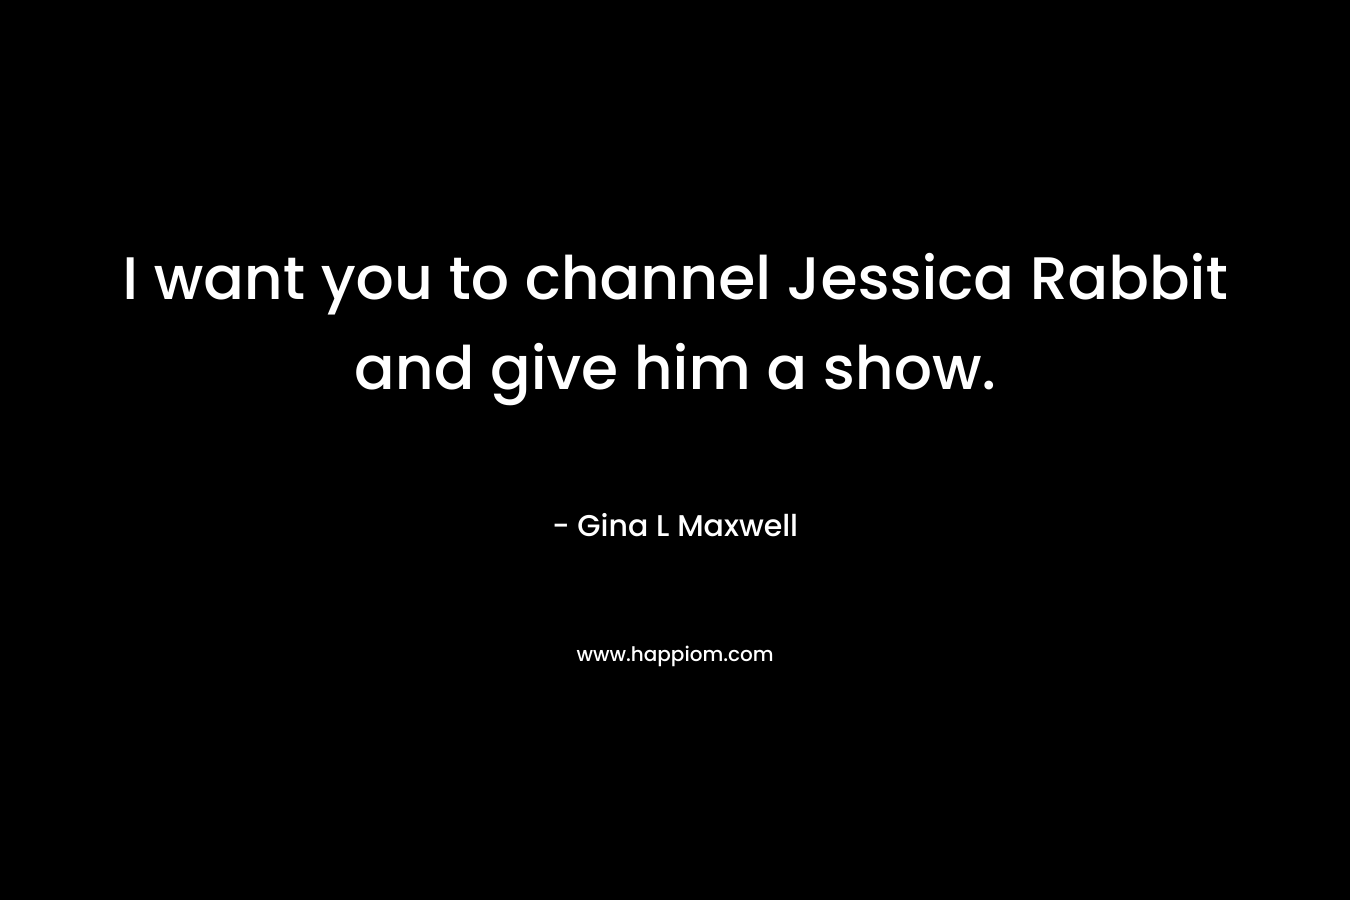 I want you to channel Jessica Rabbit and give him a show. – Gina L Maxwell